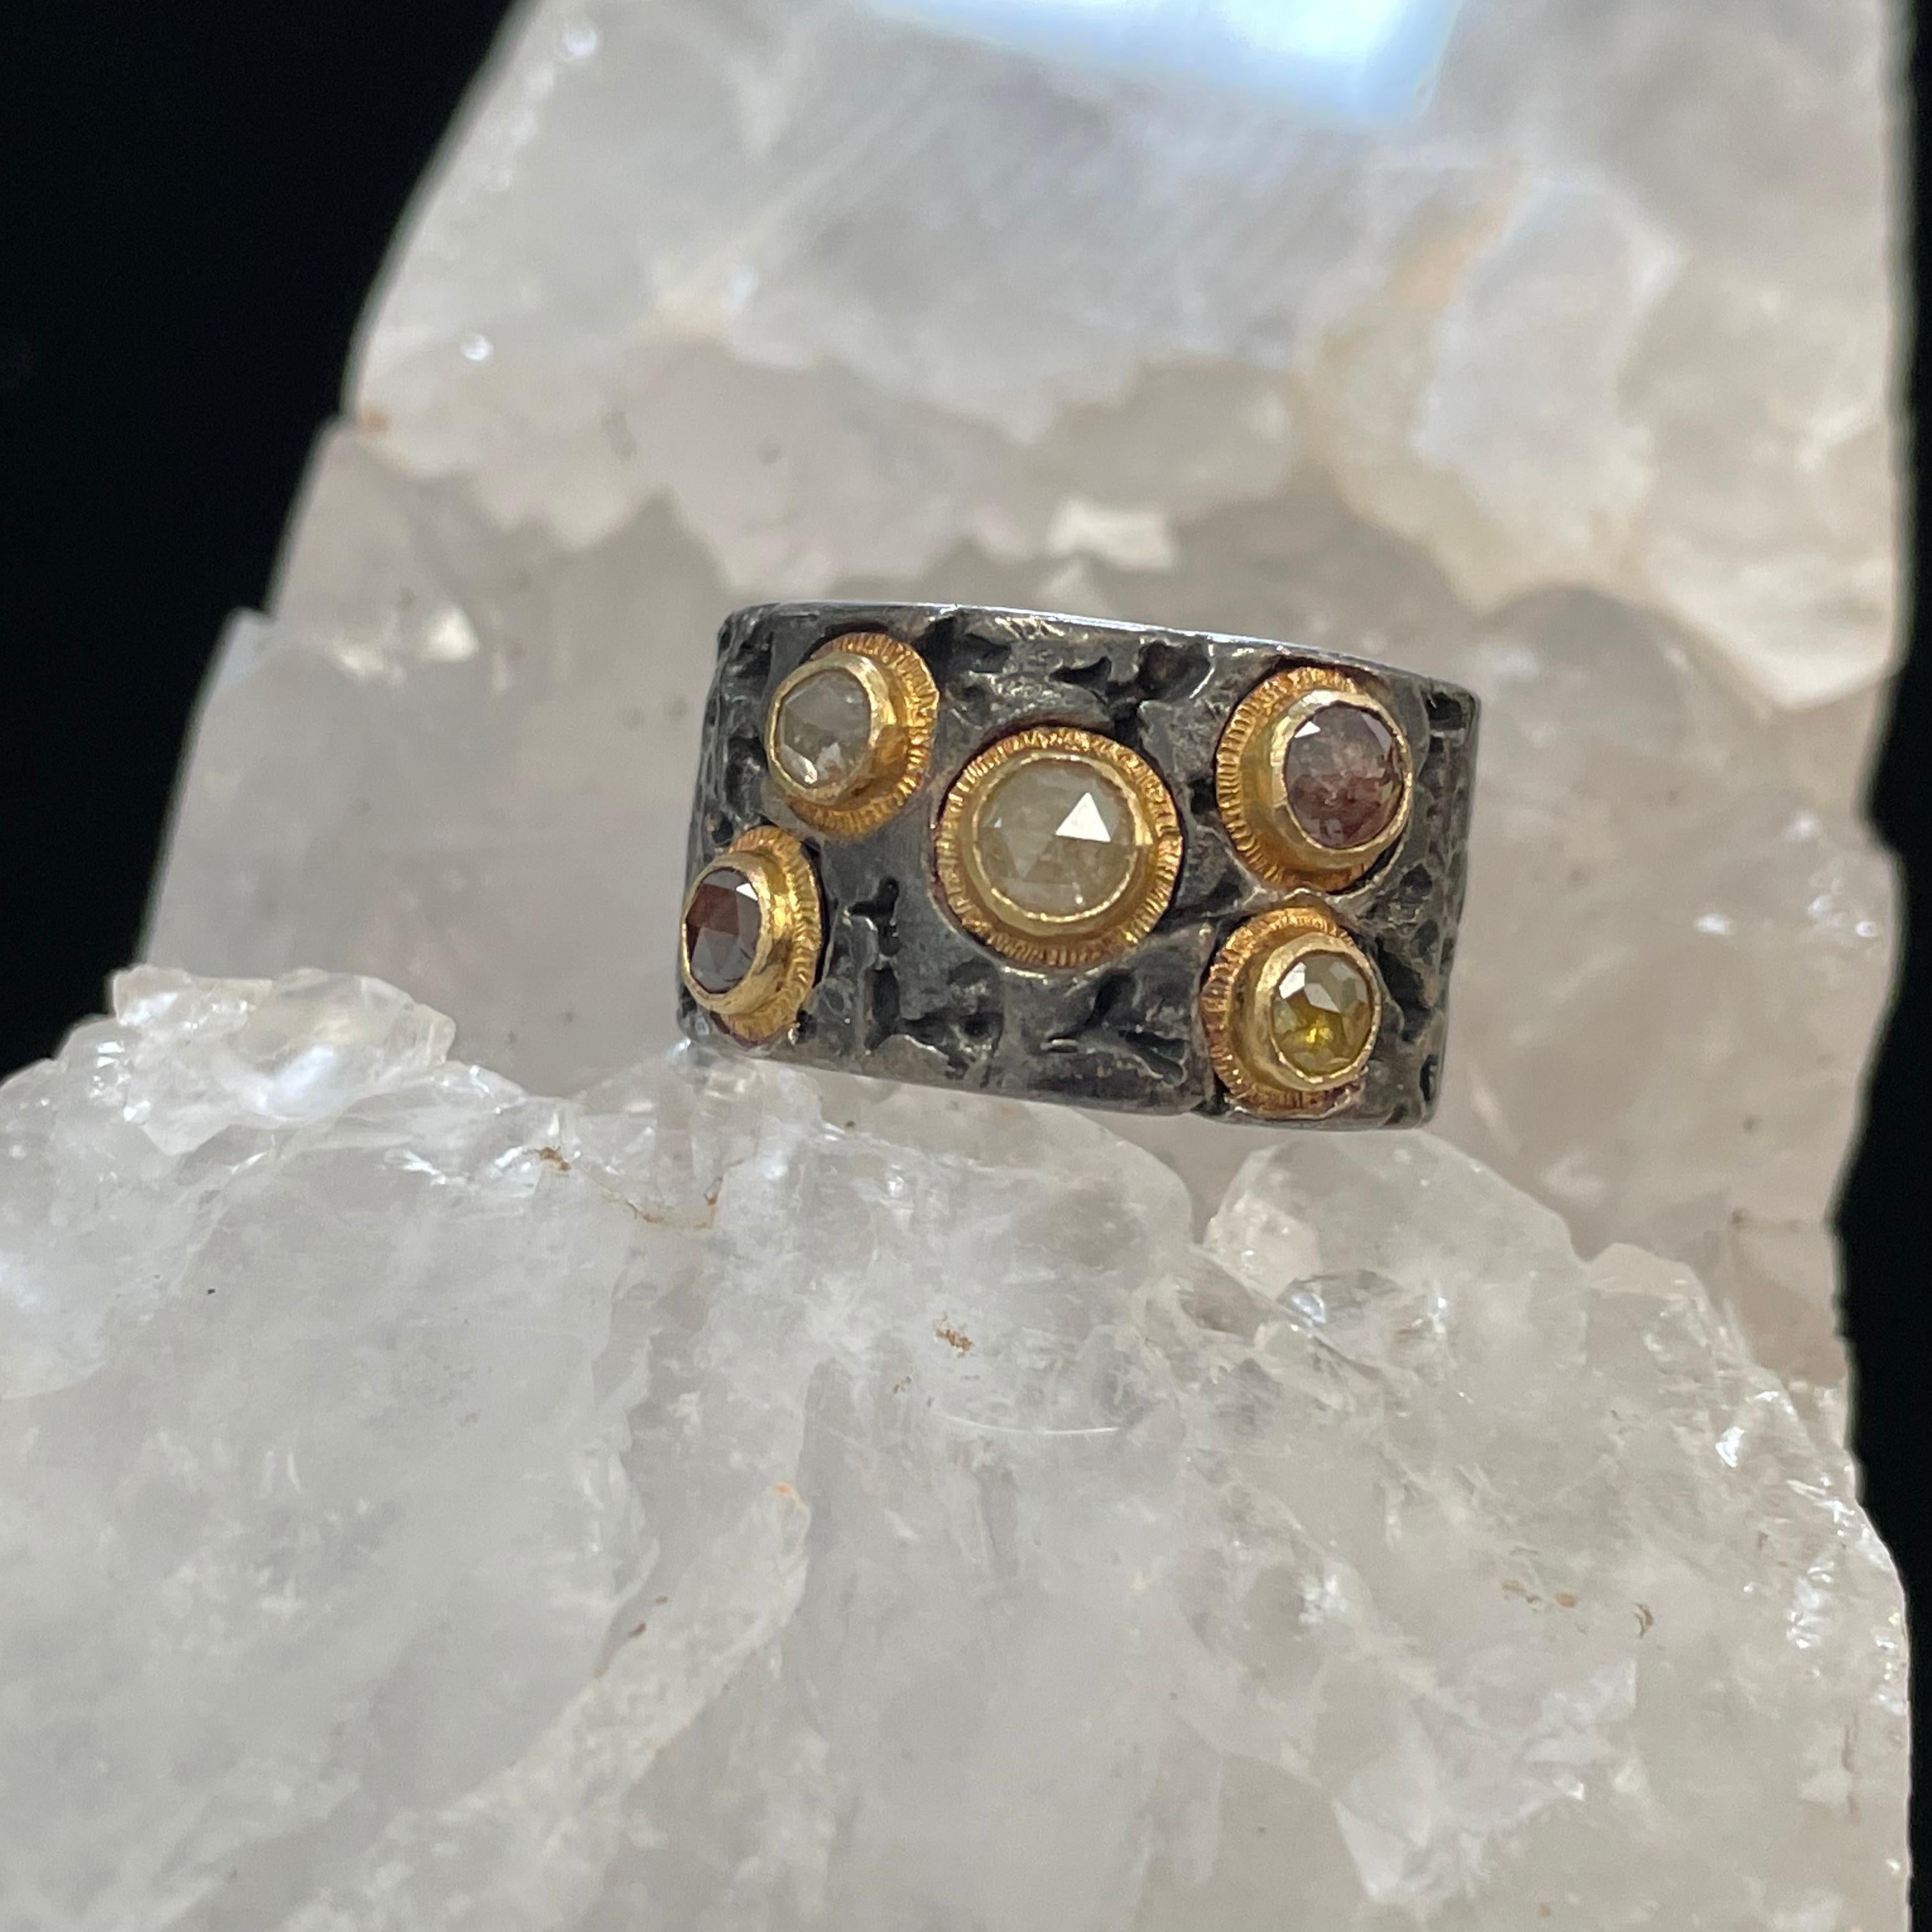 5 multi-colored and multi-sized (3-4 mm) diamonds totaling 1.1 carats are set with line textured 18K bezel accents into this organic oxidized silver and 18K gold Steven Battelle design.  This particular ring is sized 6, and is not resizable.  We can